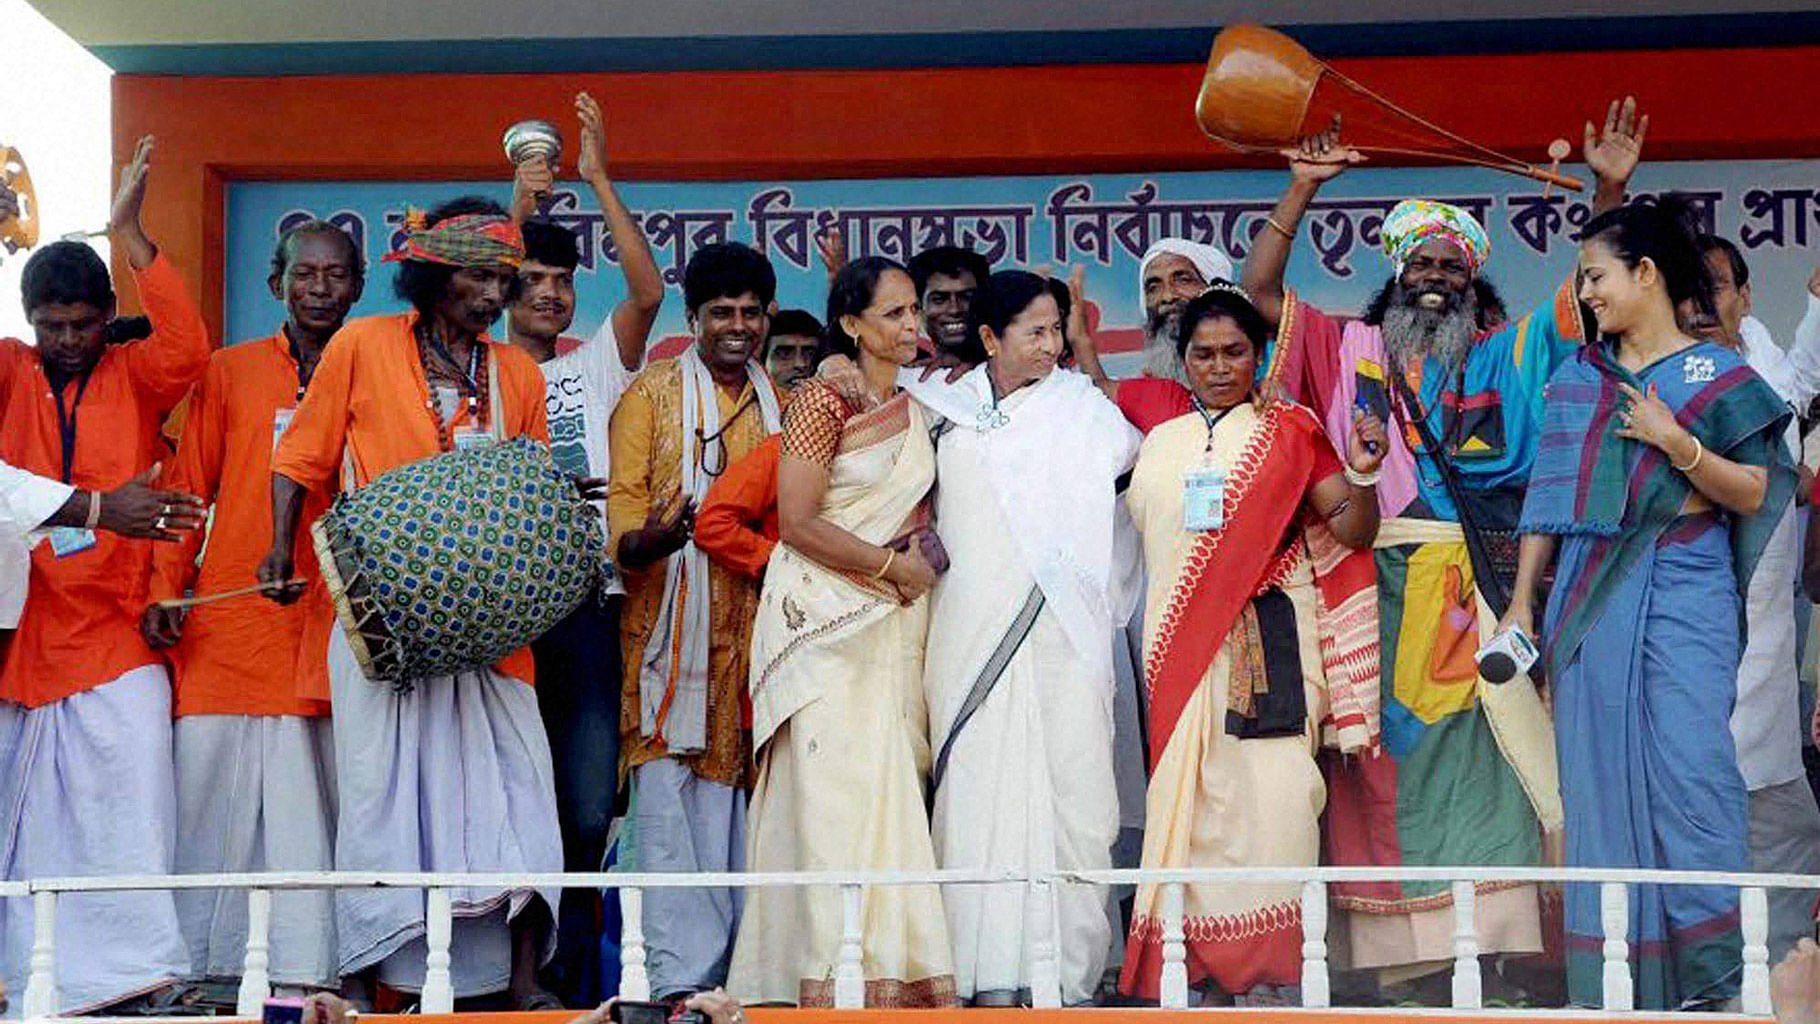 

West Bengal Chief Minister Mamata Banerjee participates in an election rally  in Nadia district of West Bengal, on 9 April  2016. (Photo: PTI)